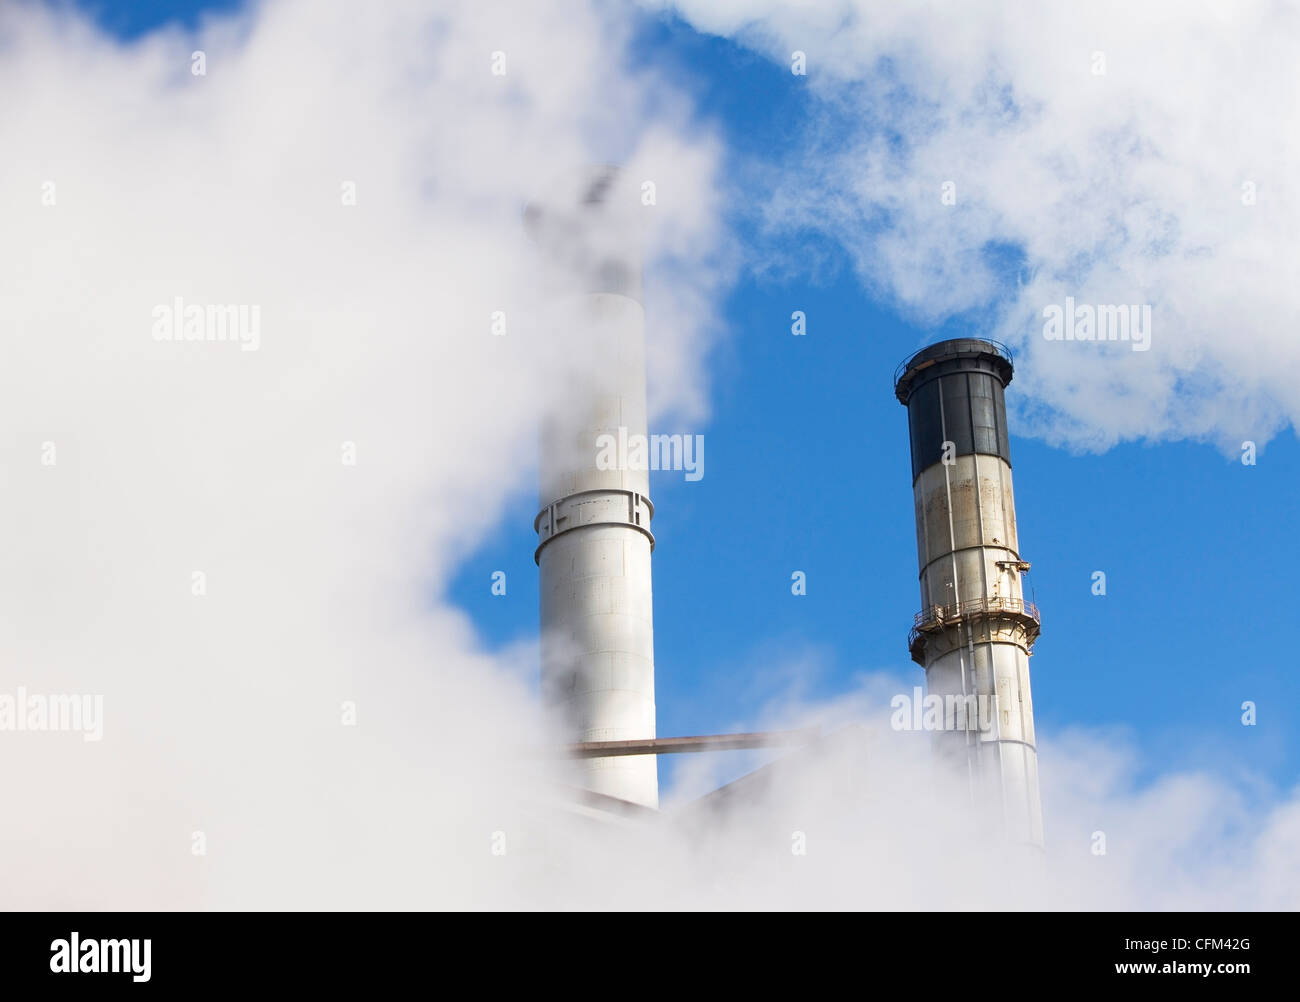 USA, New York State, New York City, part of chimneys coverred by smoke Stock Photo